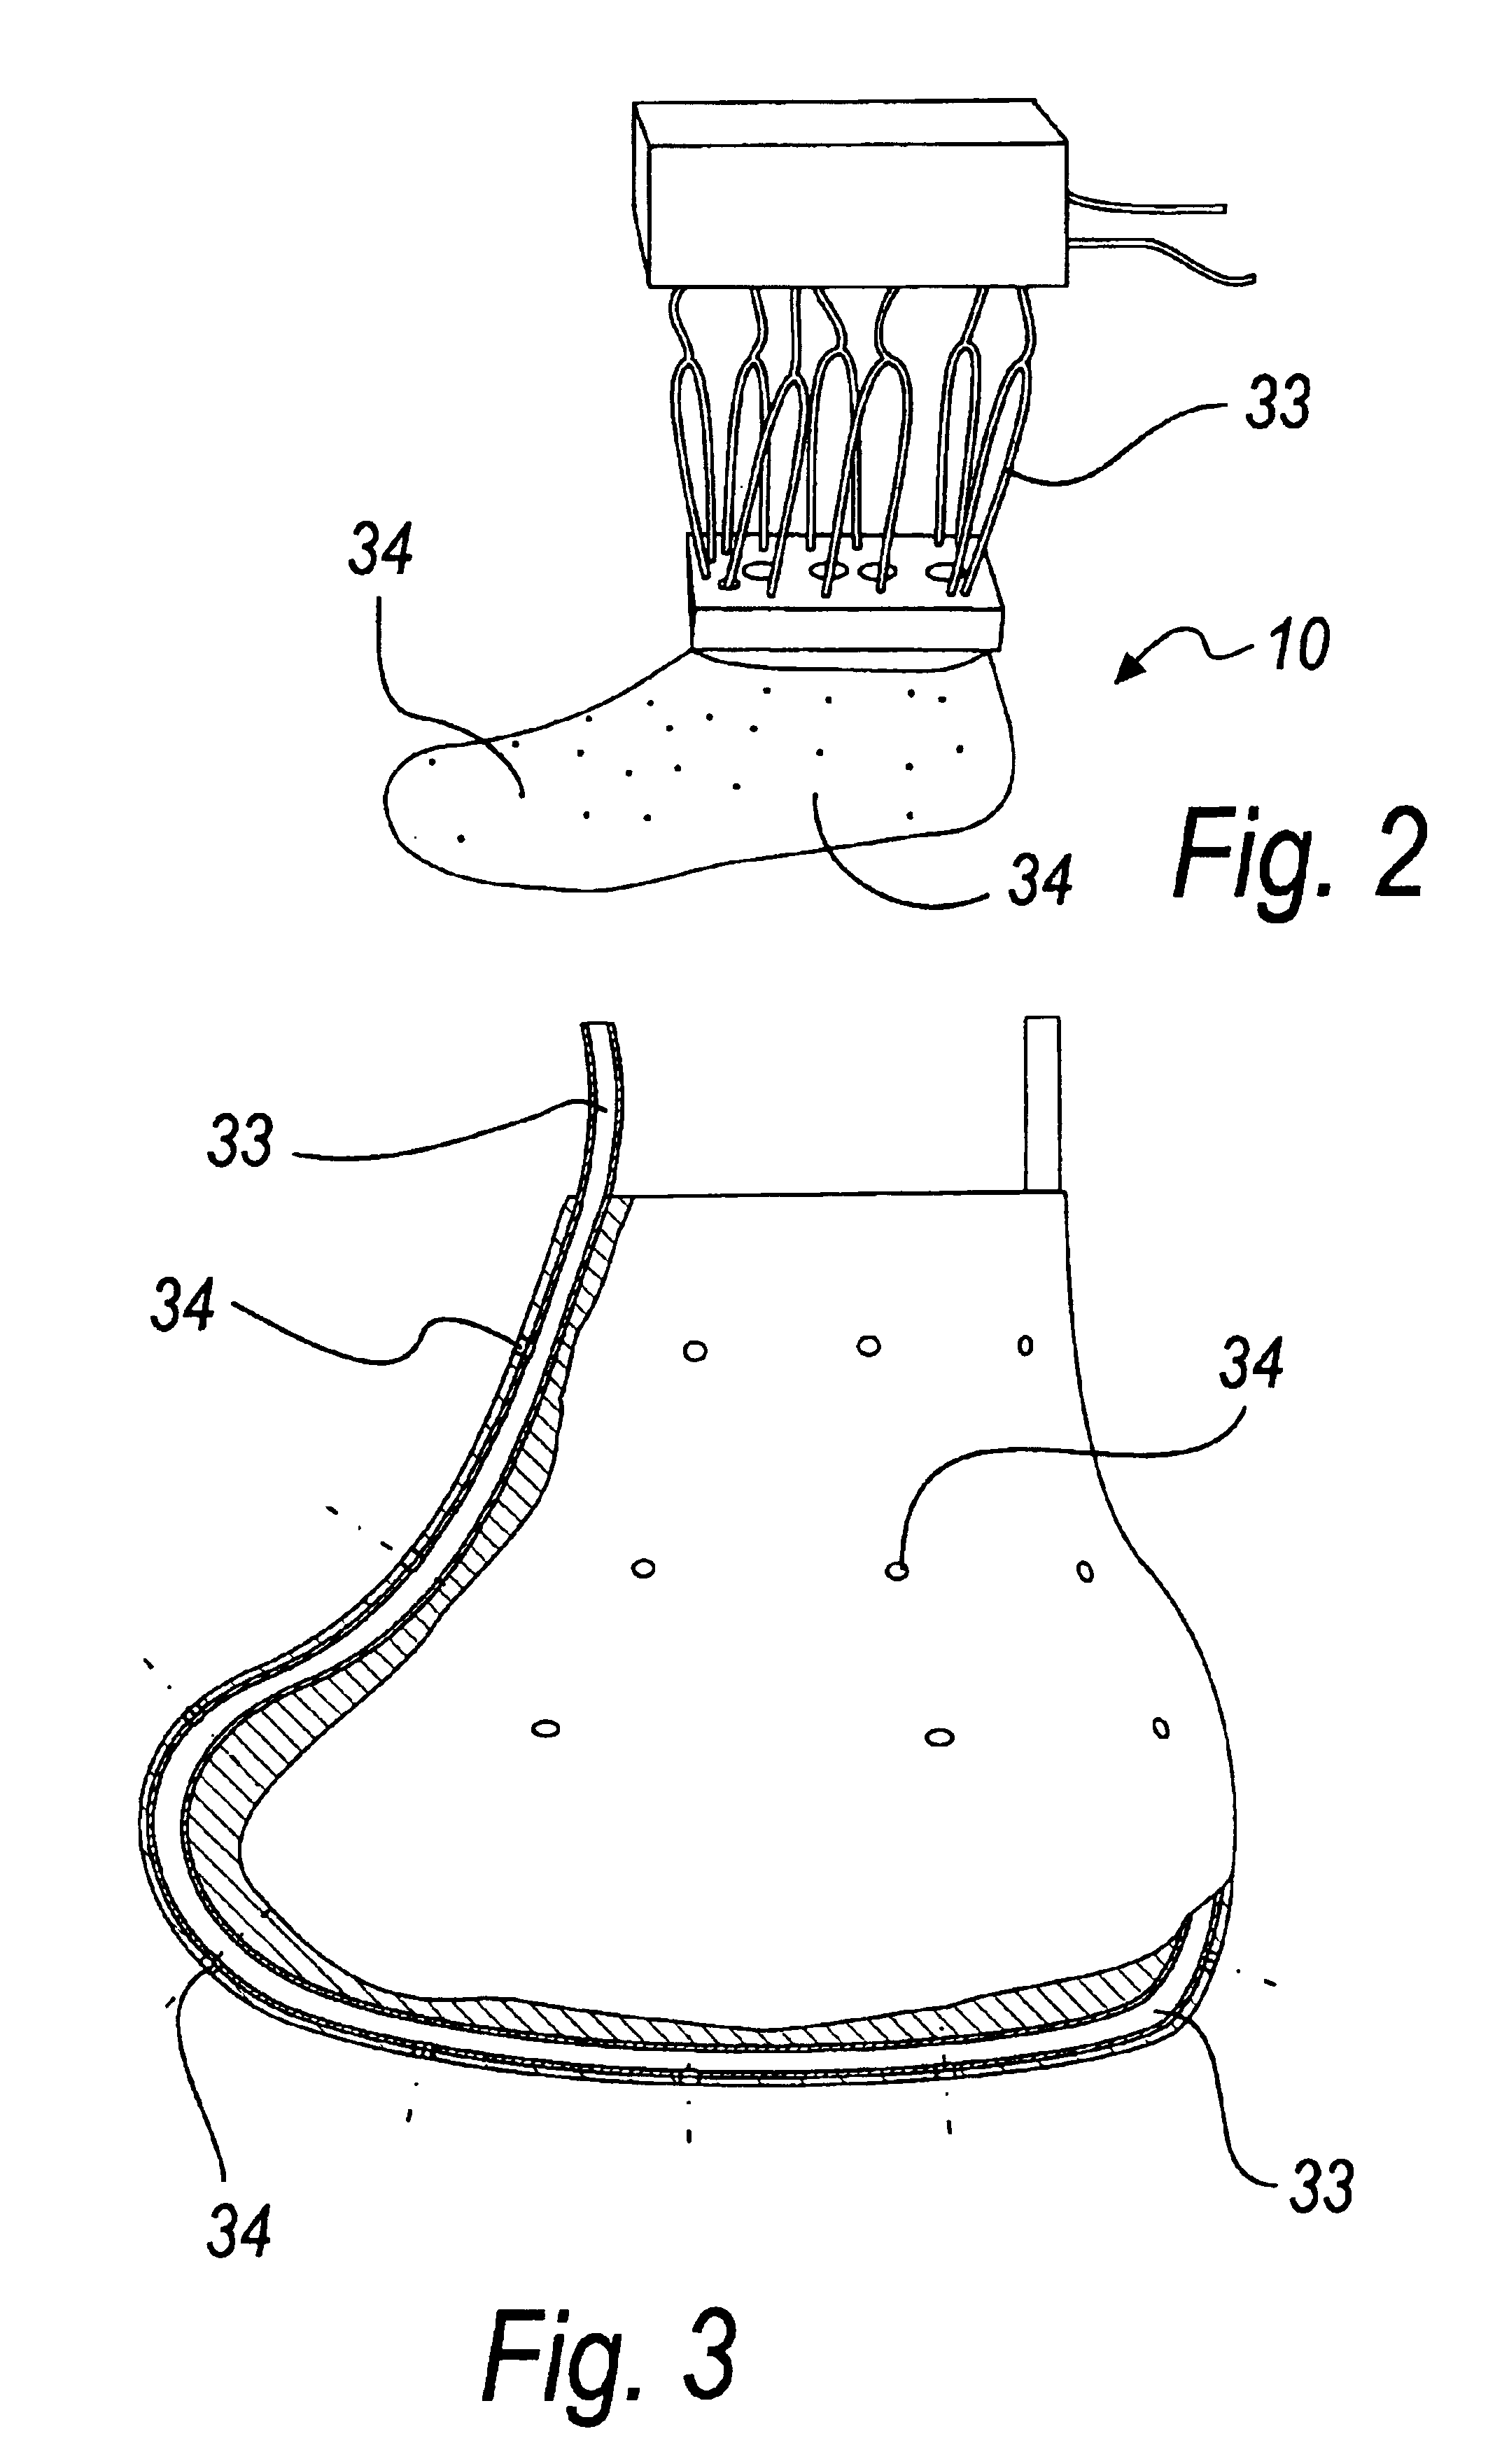 Apparatus for measuring the breathability and comfort of a shoe